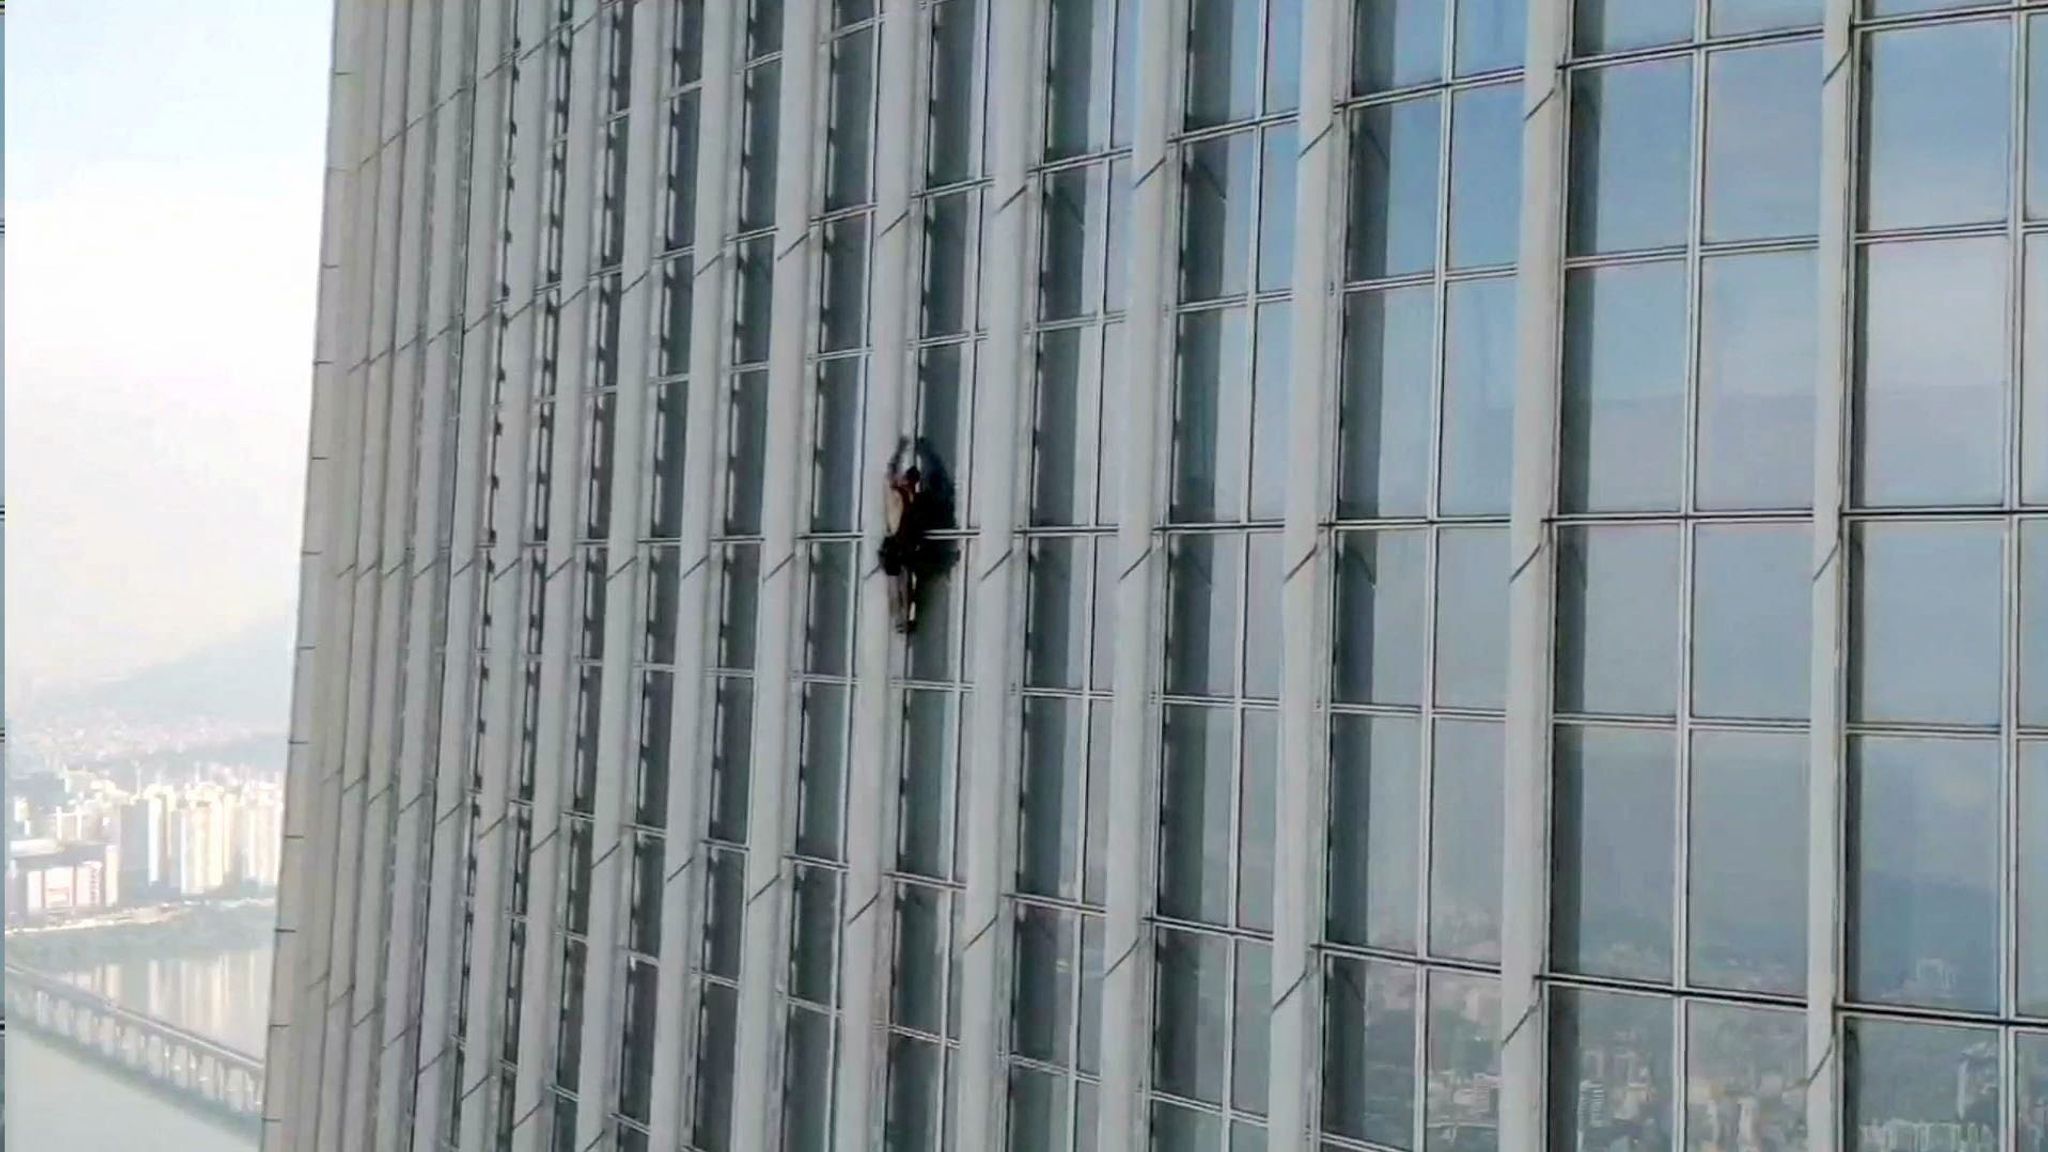 British man arrested at 73rd floor of Seoul skyscraper while attempting to reach top without safety ropes